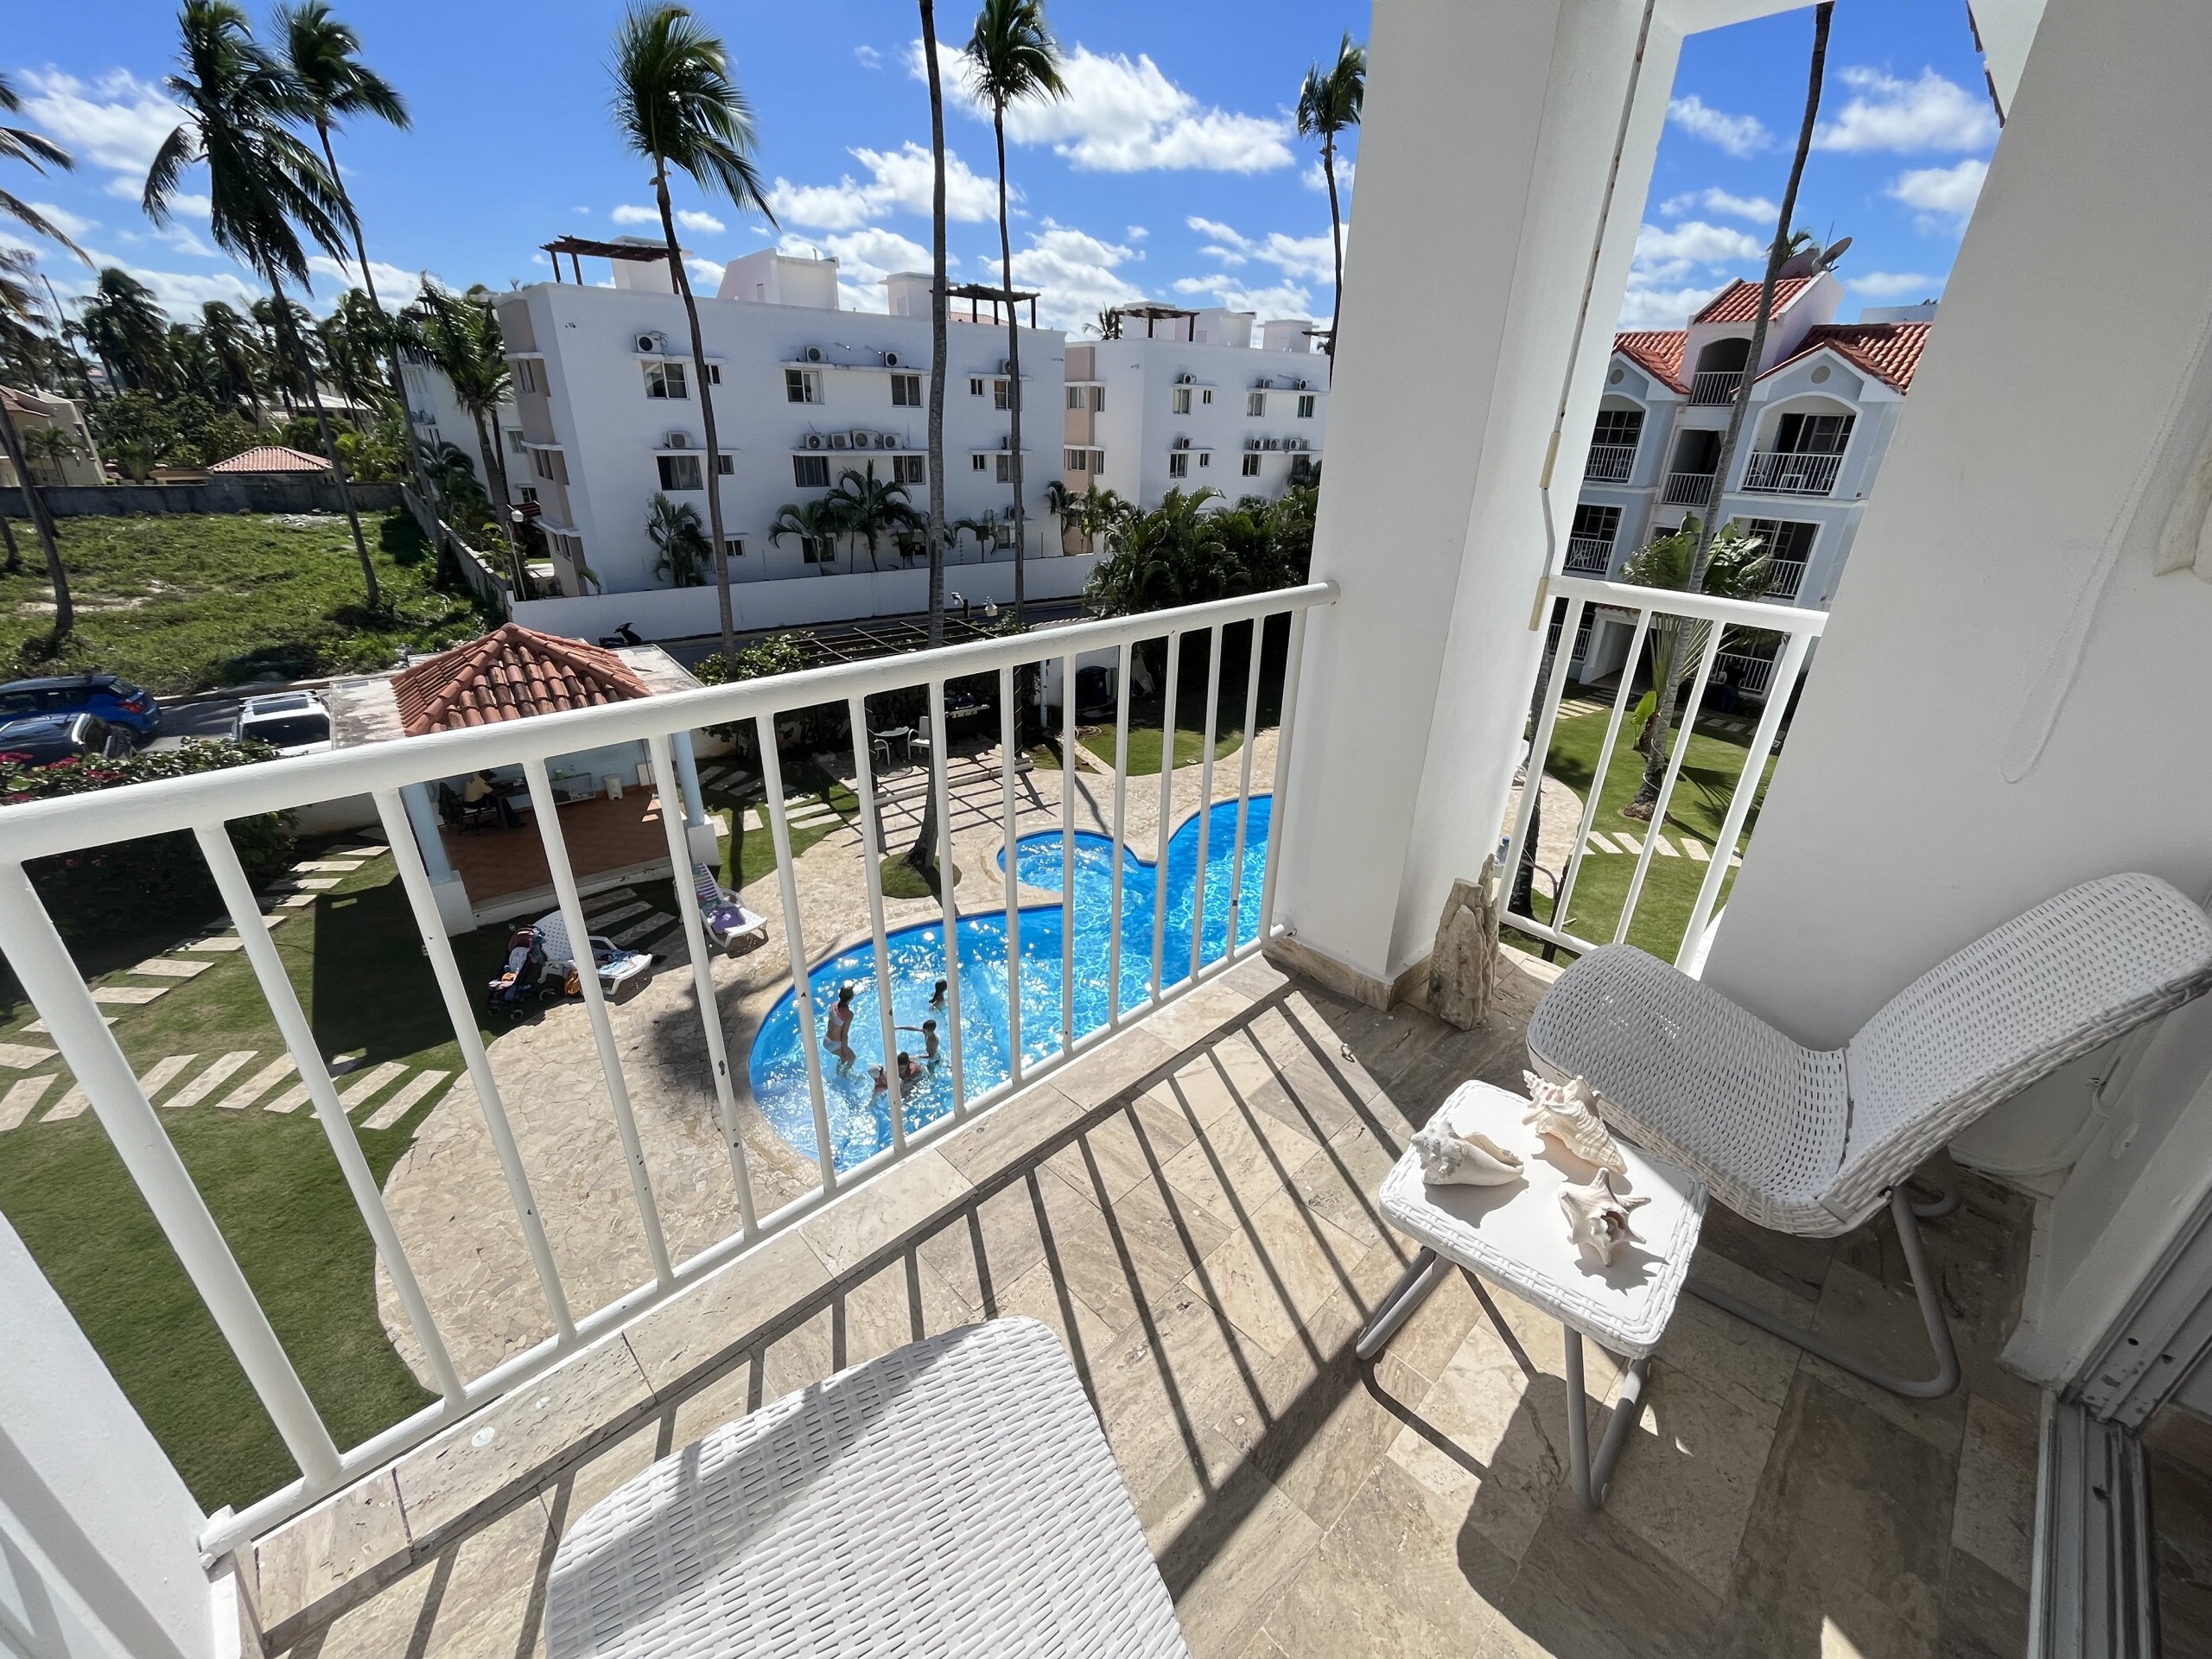 Property Image 1 - Beauty apartment with private cold jacuzzi in a private roof. El Cortecito. Playa Bavaro